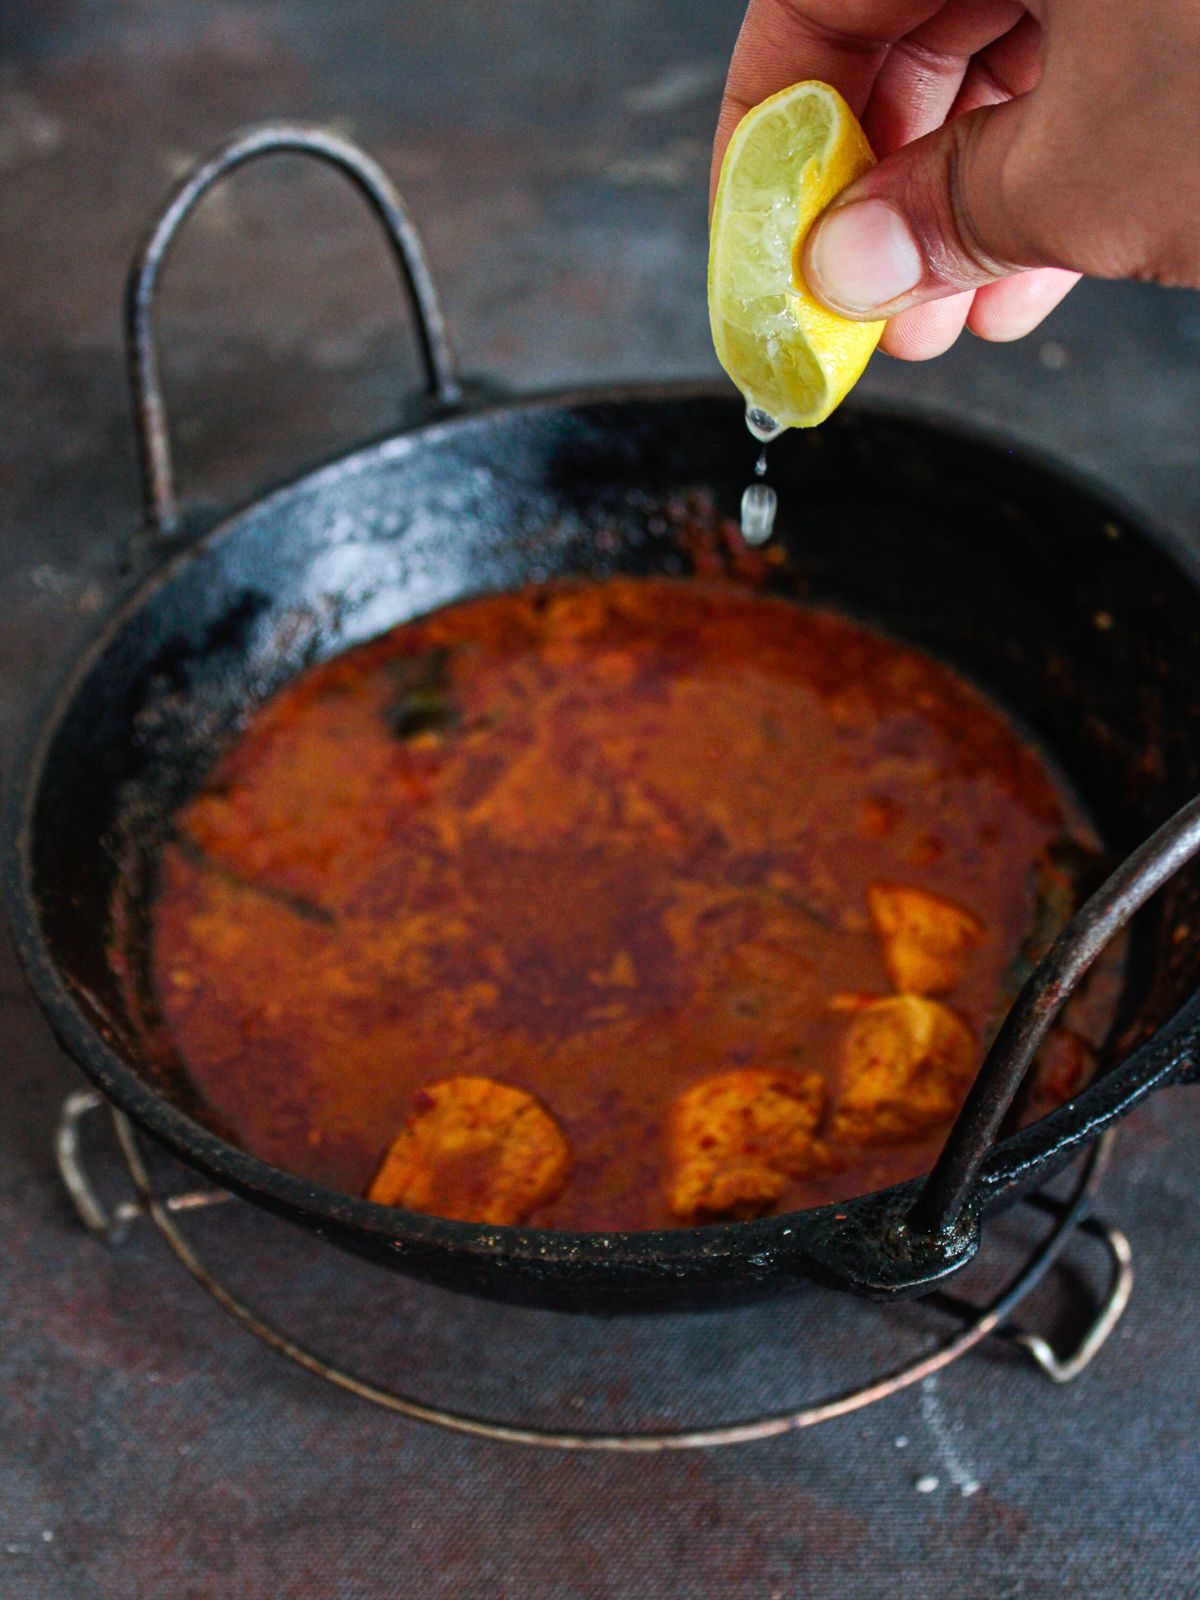 hand squeezing lemon into curry